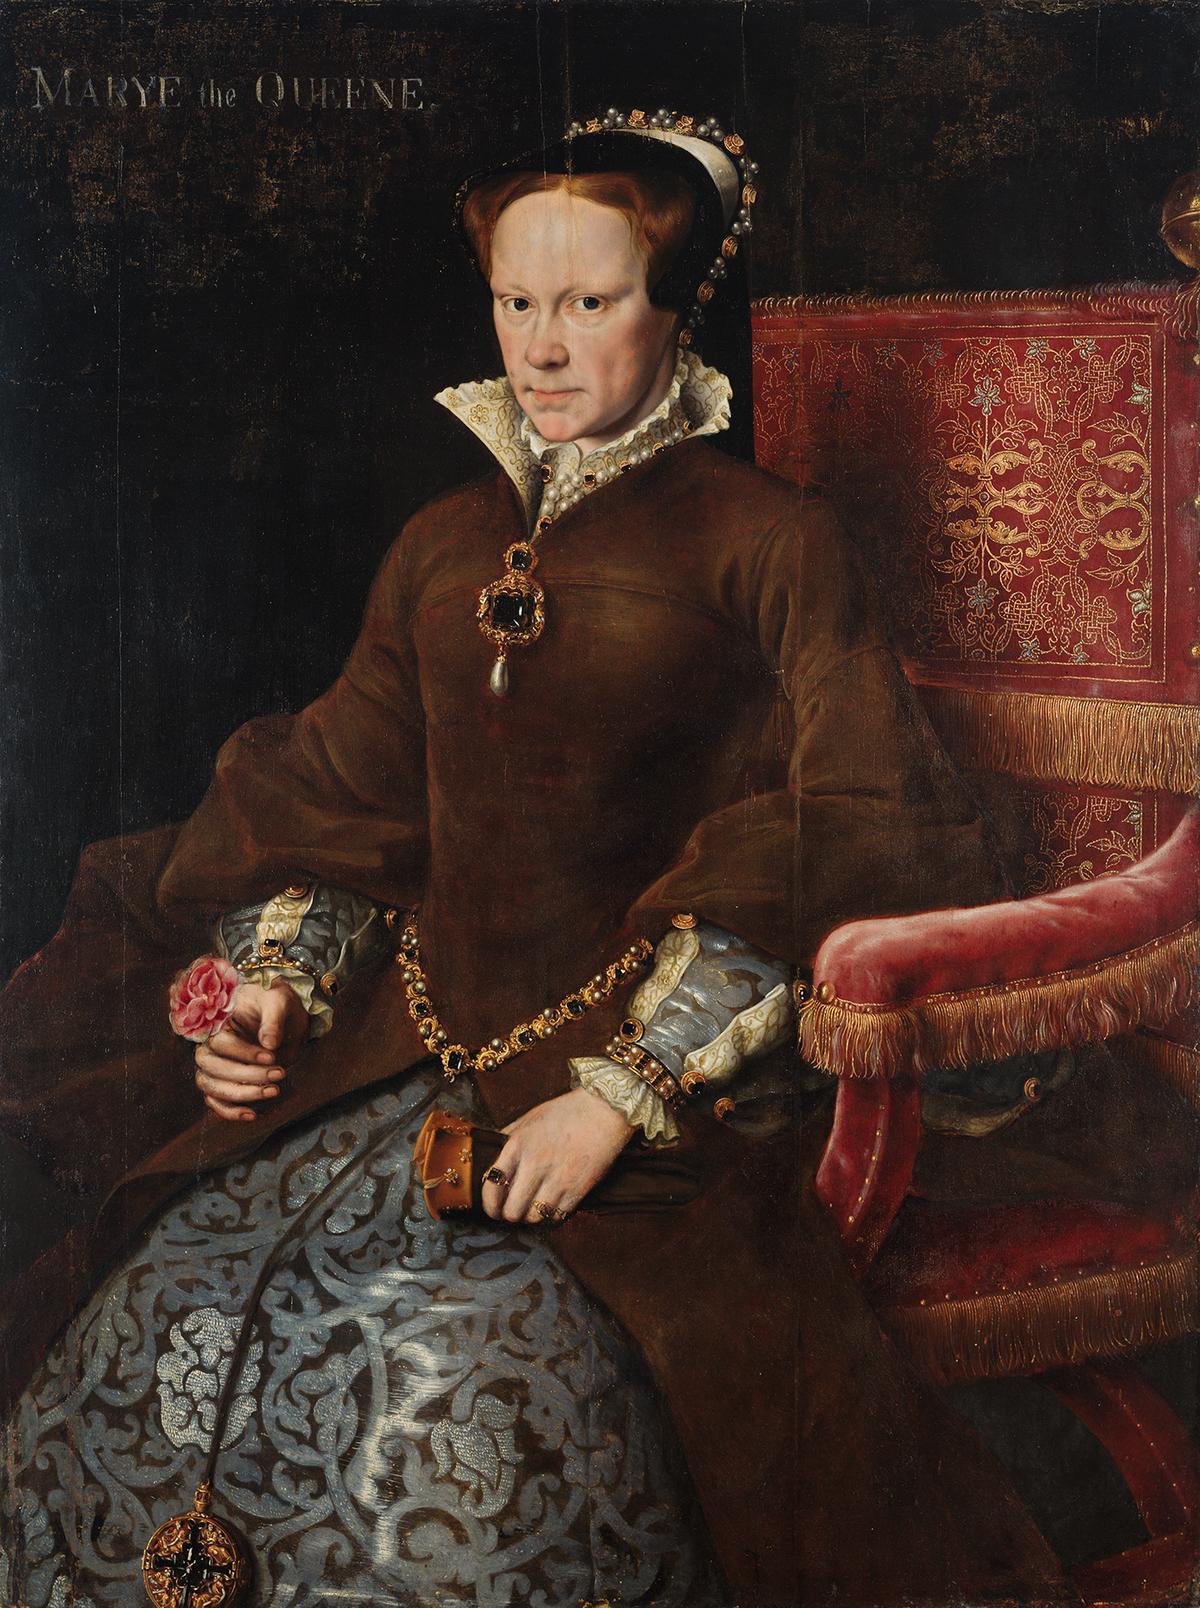 <br/>“Mary Tudor, Queen of England,” 1554, Antonis Mor and Workshop. Oil on oak panel, 44 1/8 inches by 32 11/16 inches. Isabella Stewart Gardner Museum, Boston. (Courtesy of Cleveland Museum of Art)